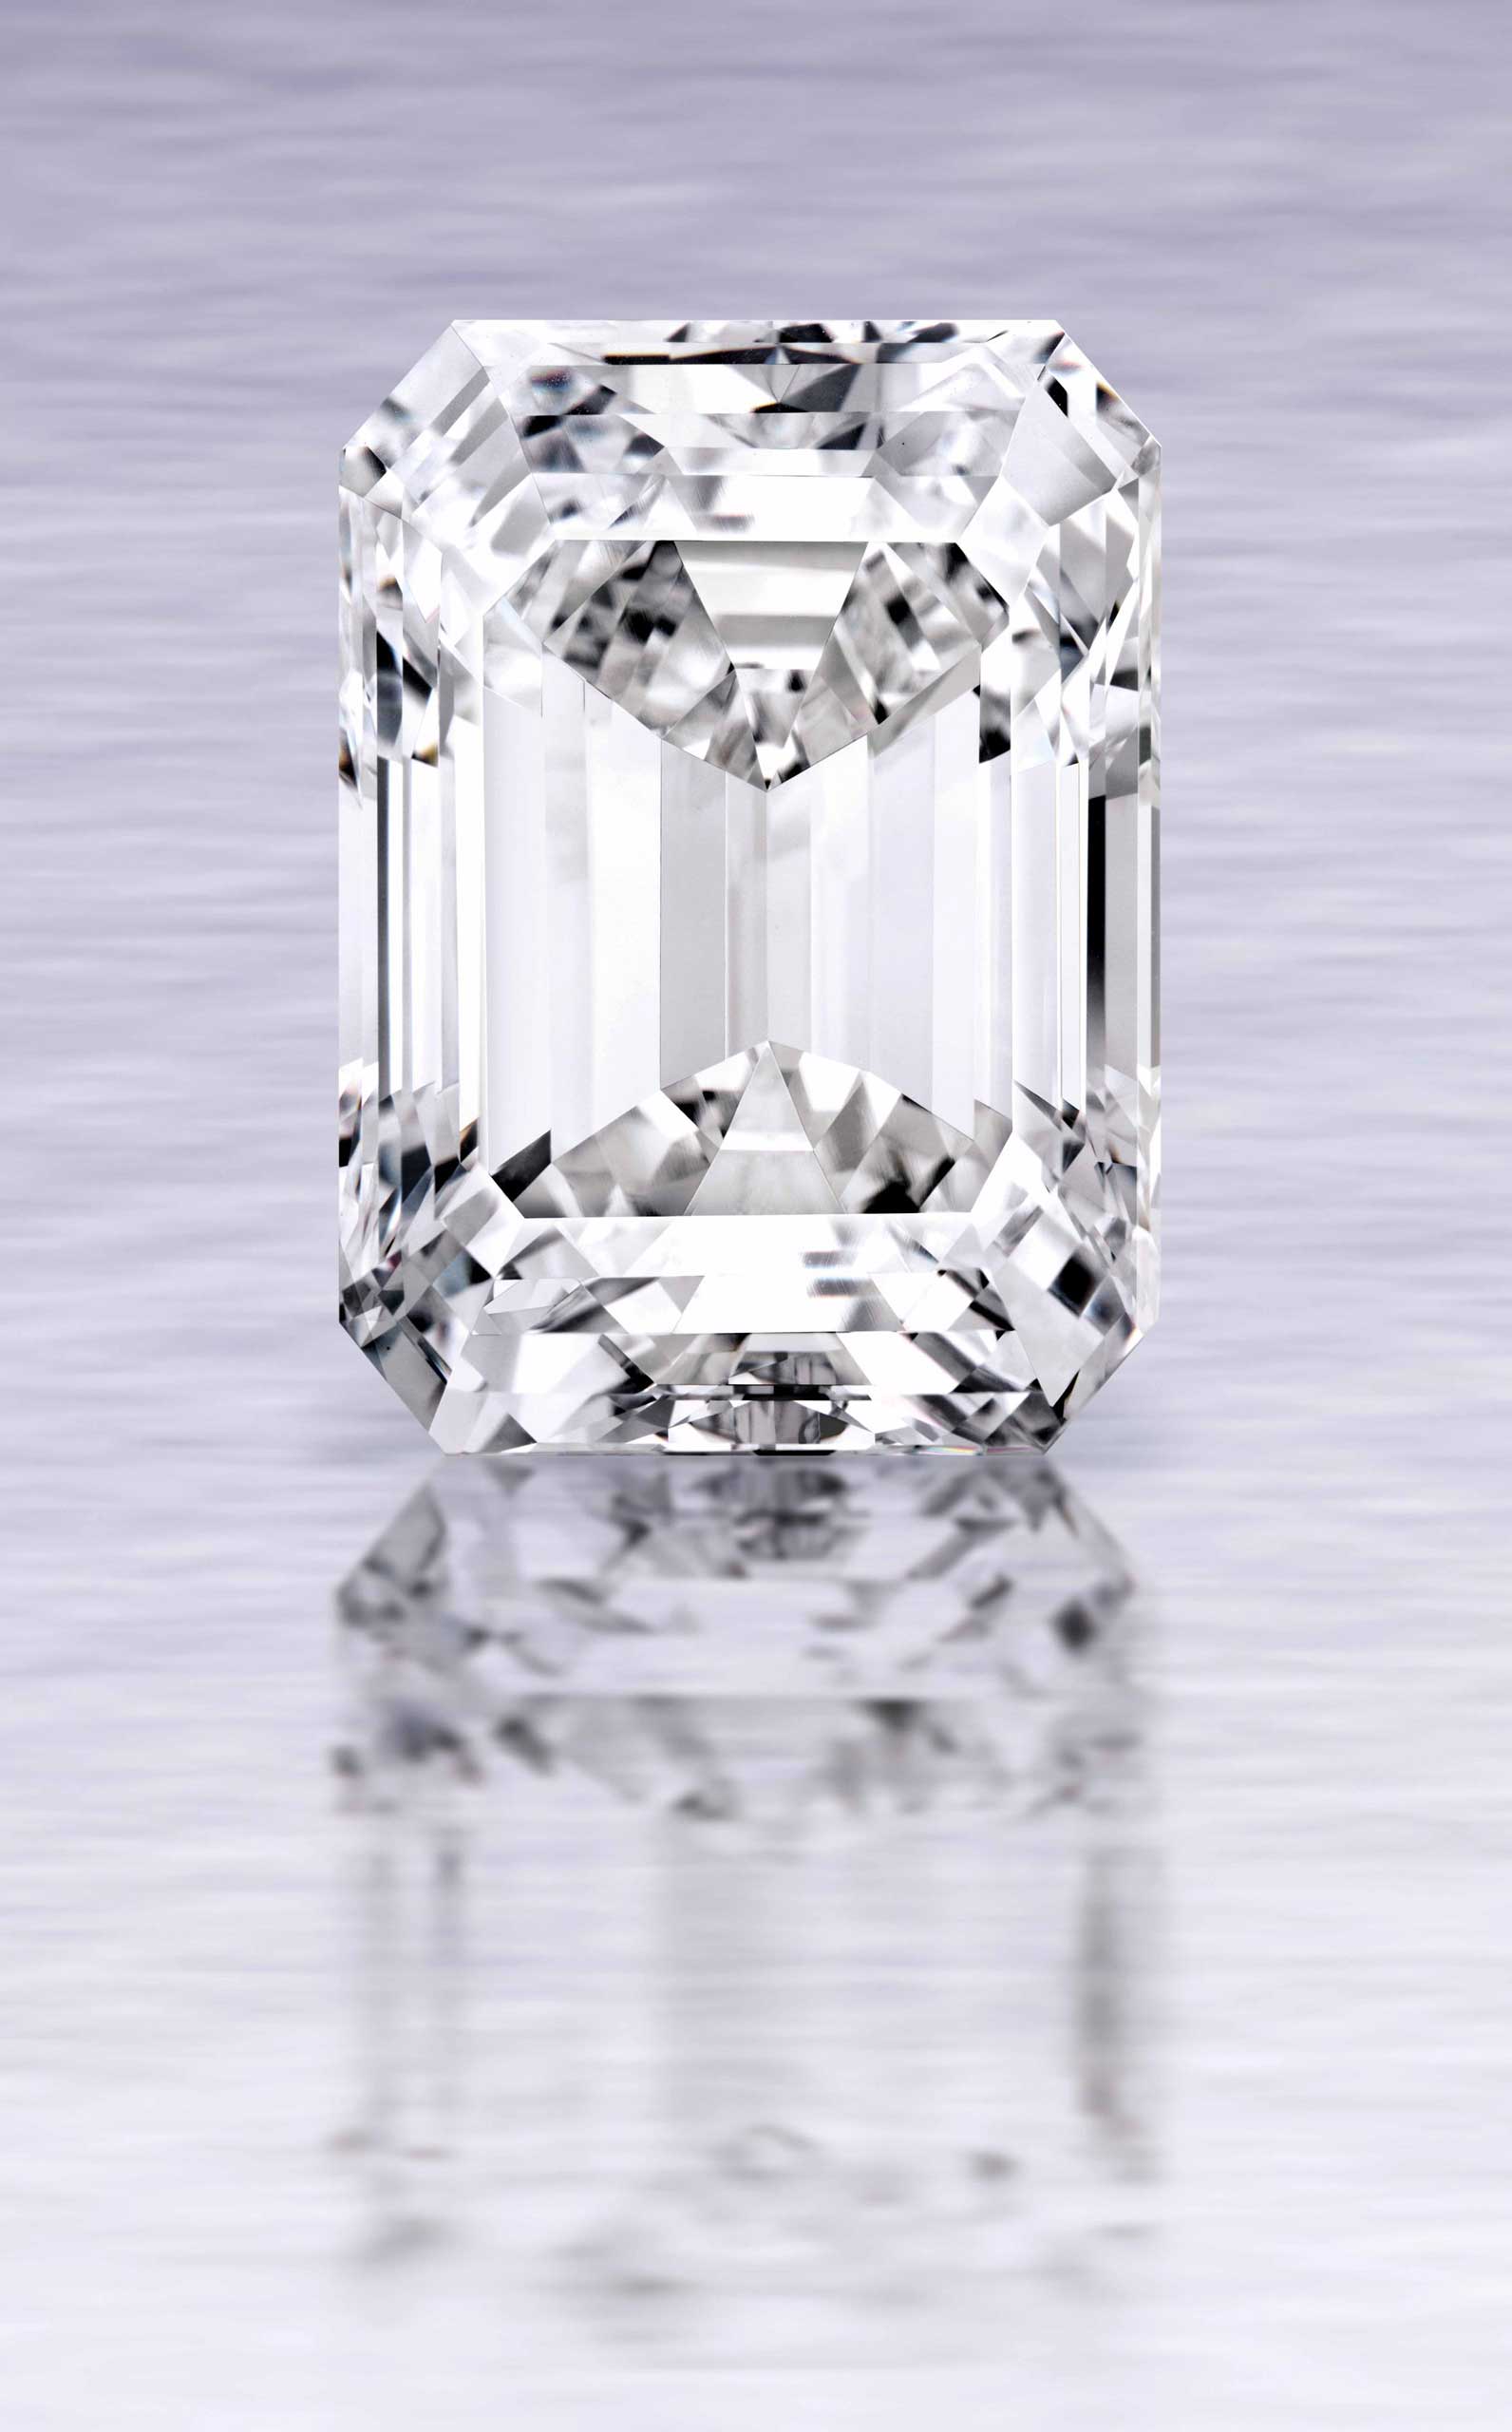 A 100-carat emerald-cut D color diamond, which was mined by De Beers in southern Africa. (Reuters)